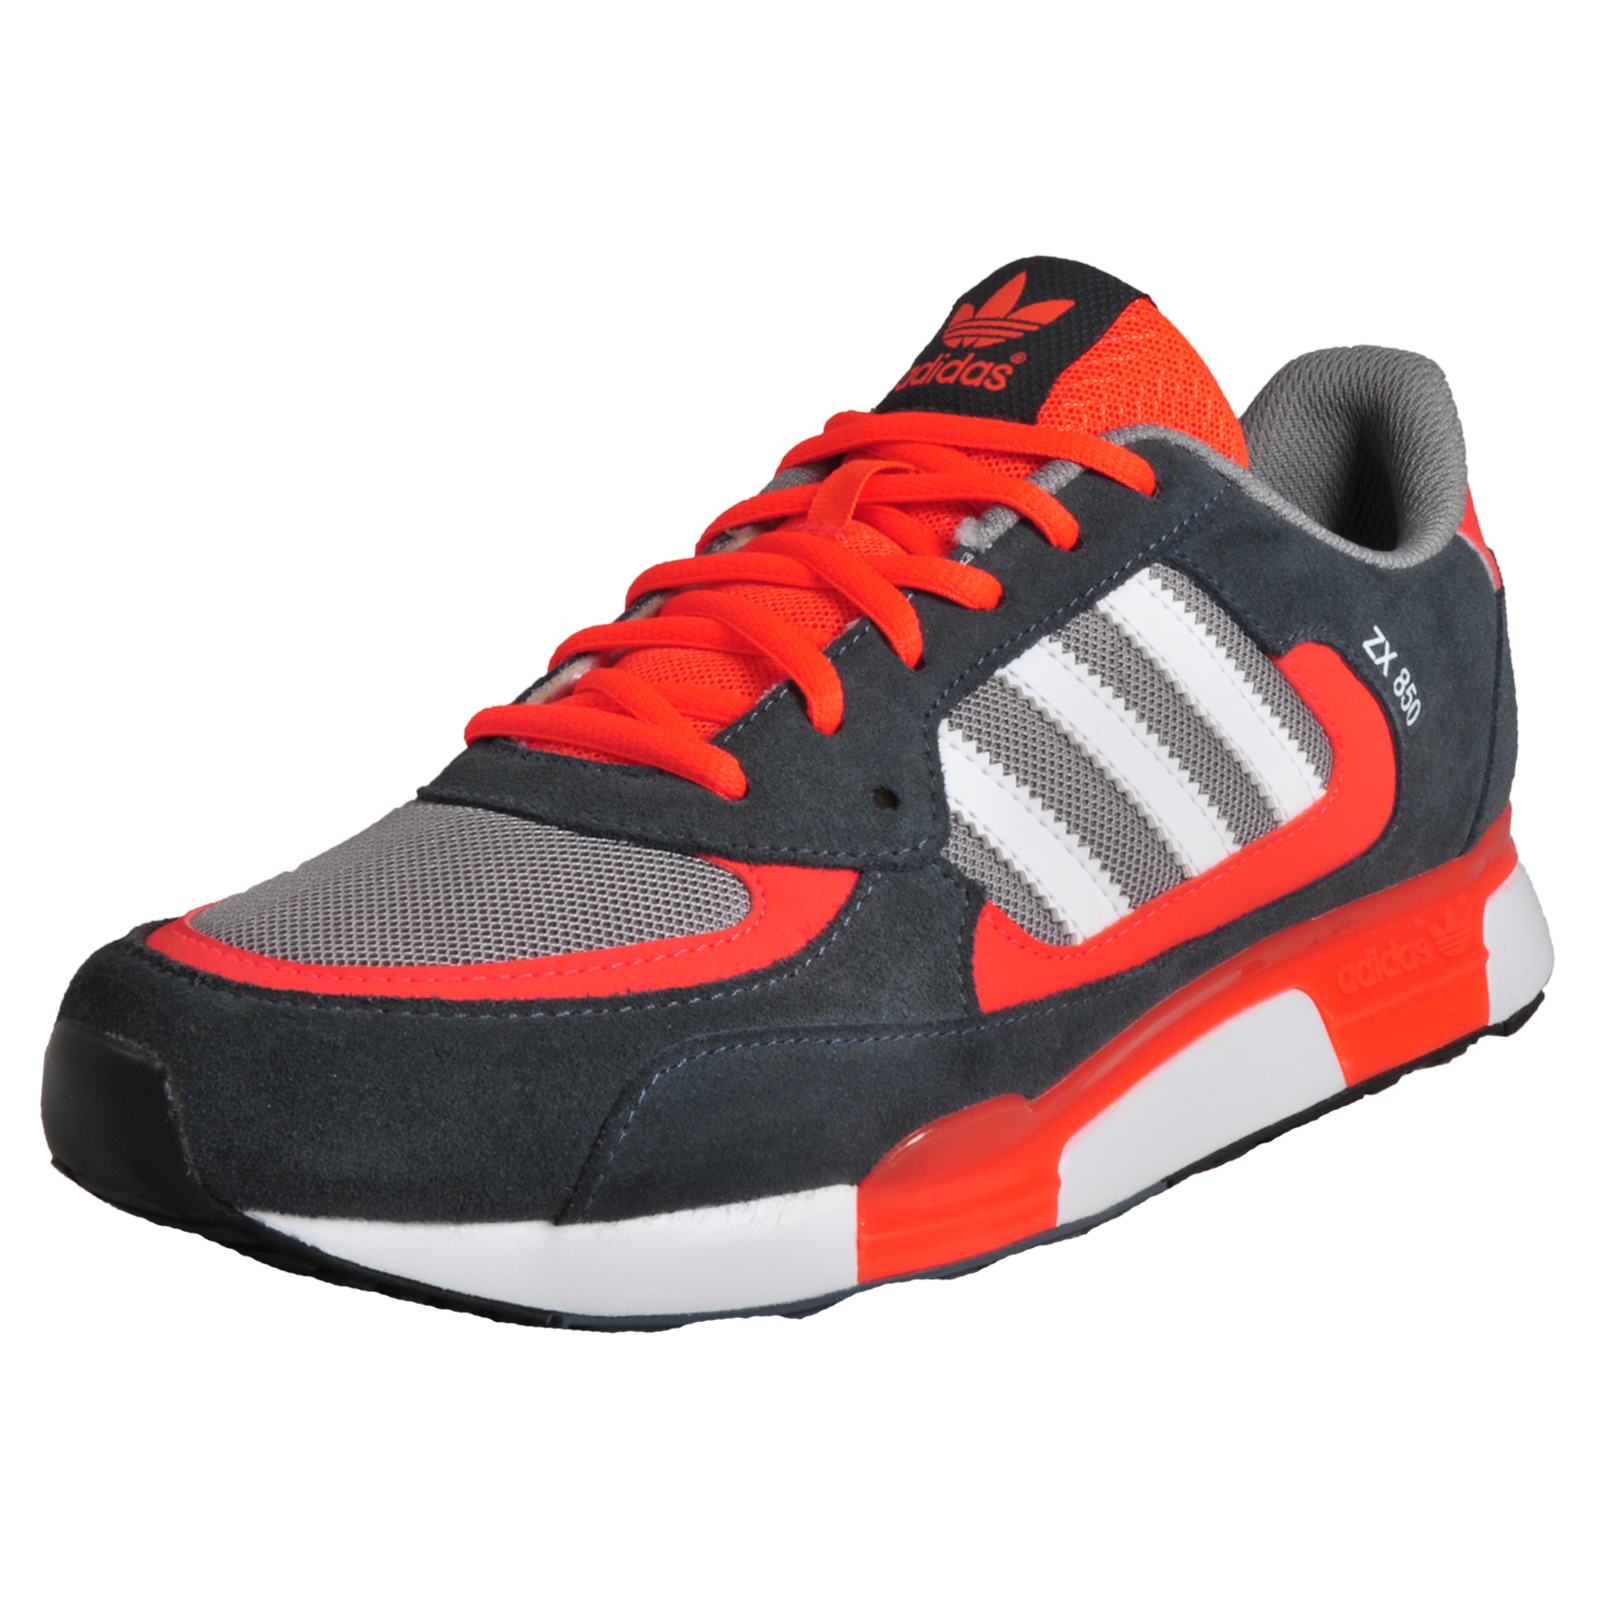 Adidas Zx 850 Running Shoes Black Grey Mens White France